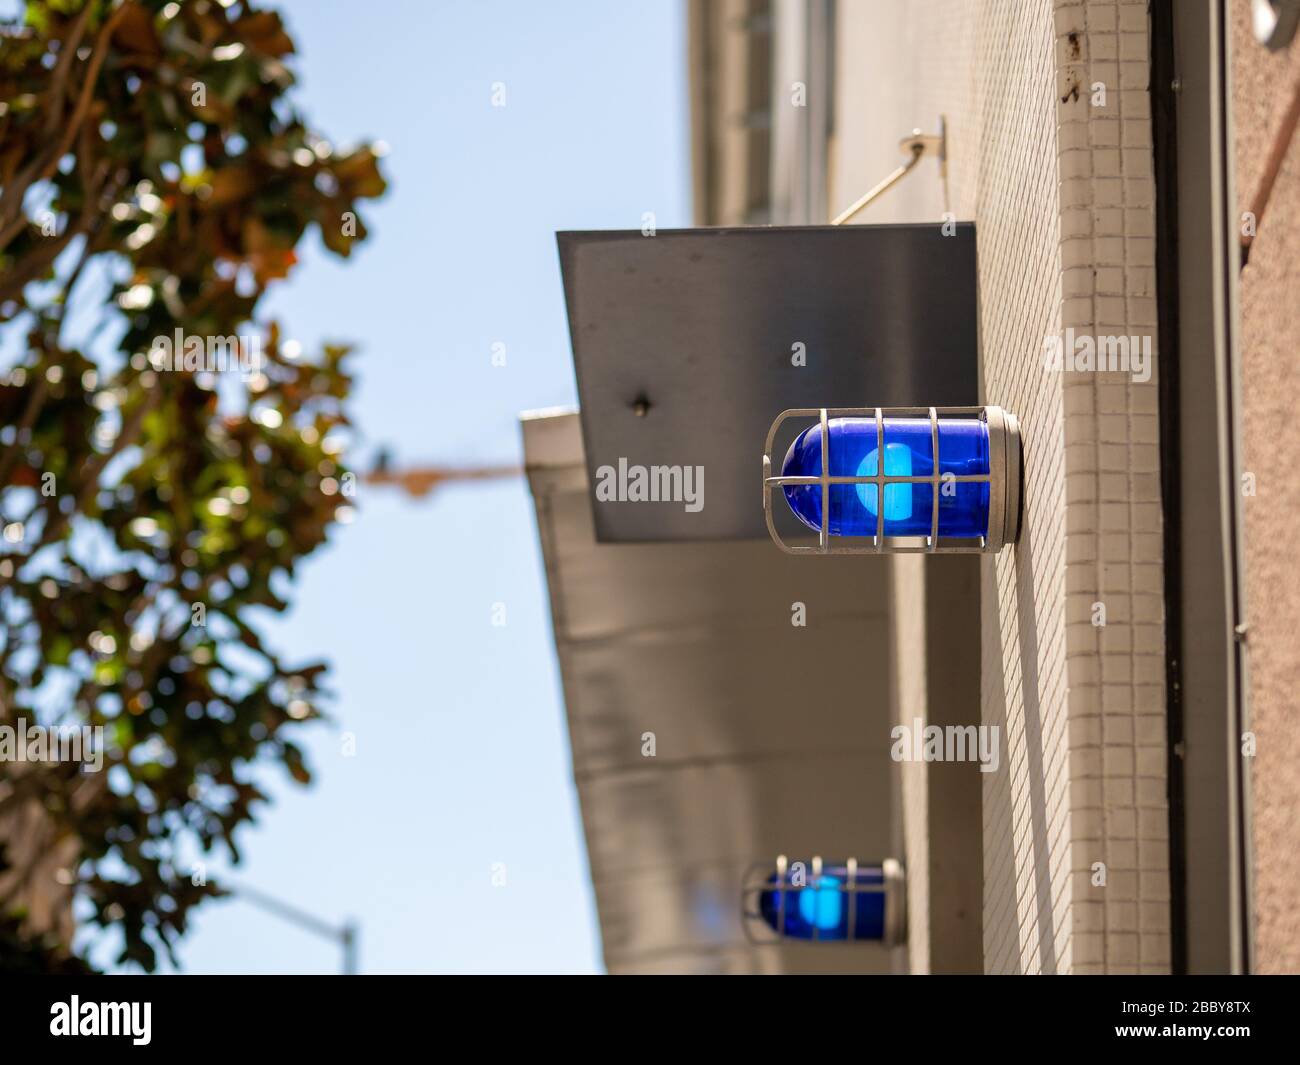 Blue caution safety lights affixed to building outside and positioned high Stock Photo